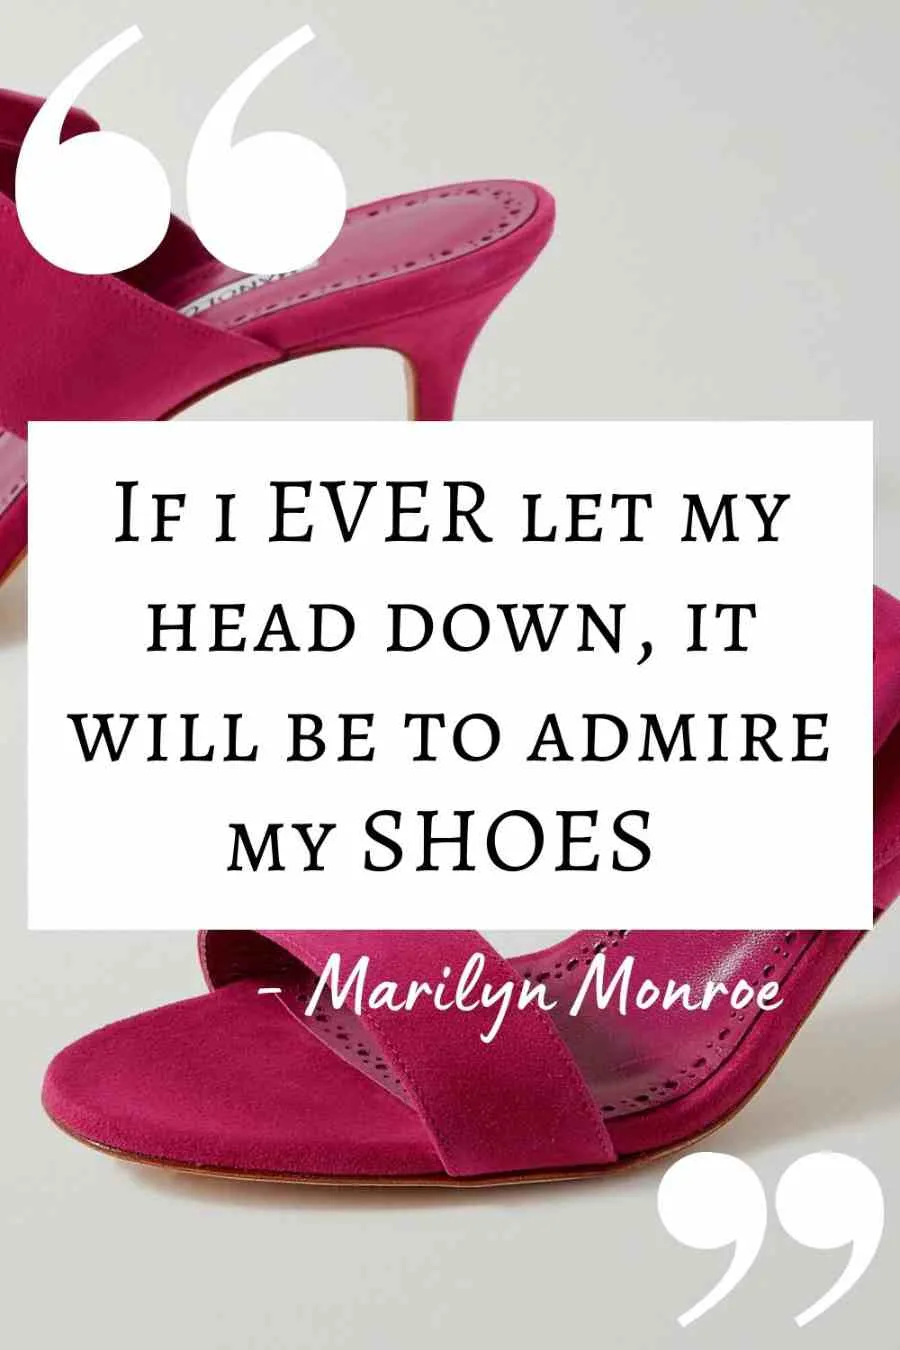 75+ Best Shoes Quotes for Shoe Lovers & for Great Instagram Captions